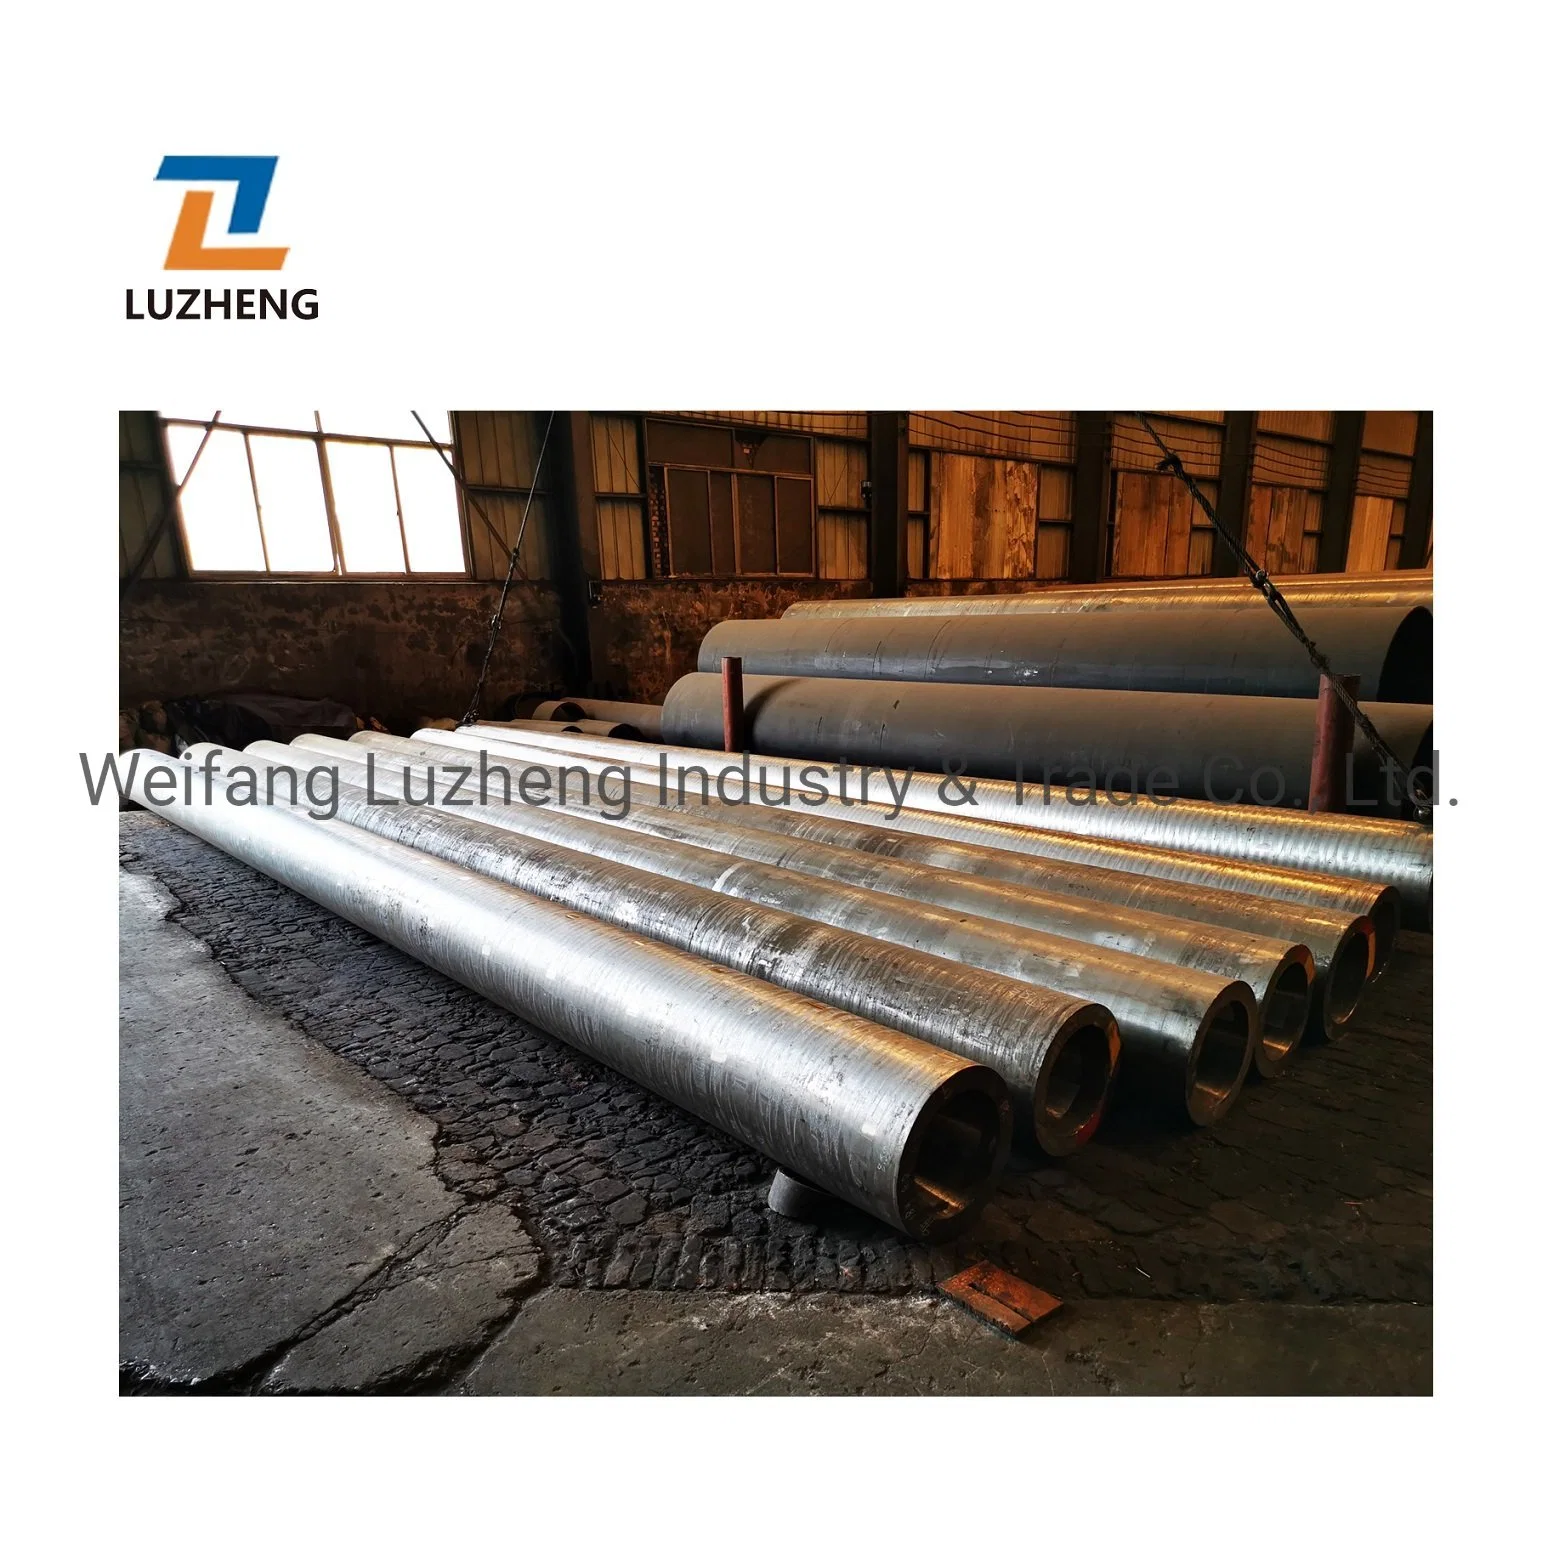 ASTM A335 ASME SA335 Seamless Steel Pipe, P11 Steel Pipe, P5 P22 High Pressure Boiler Seamless Pipe Quenched and Tempered